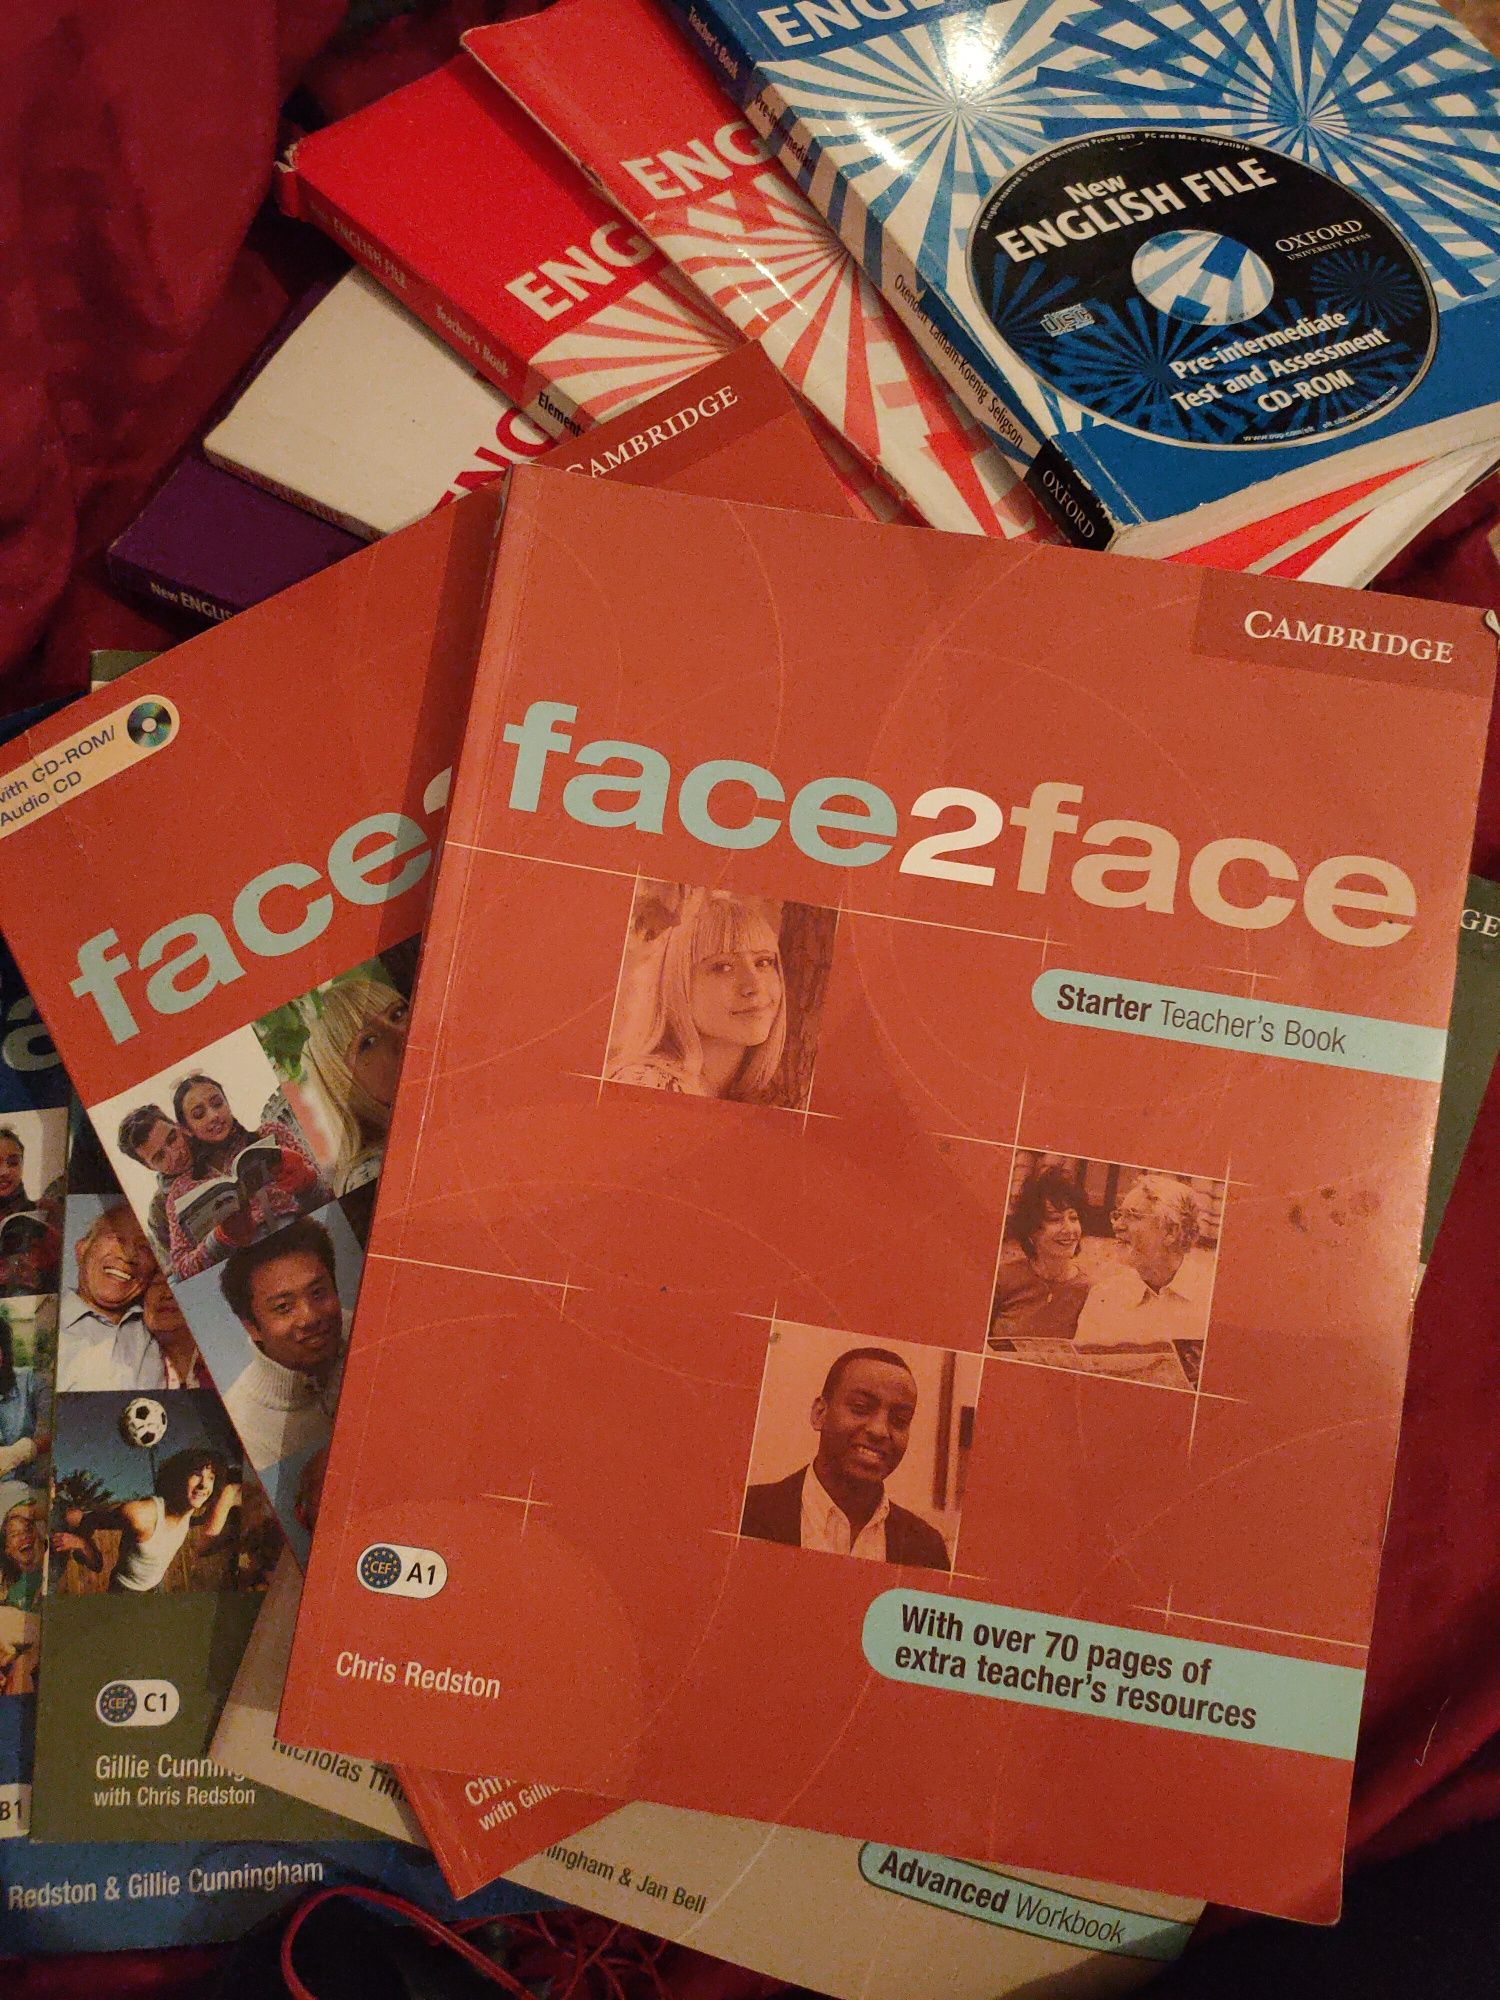 Face2face stater teacher book and student’s book